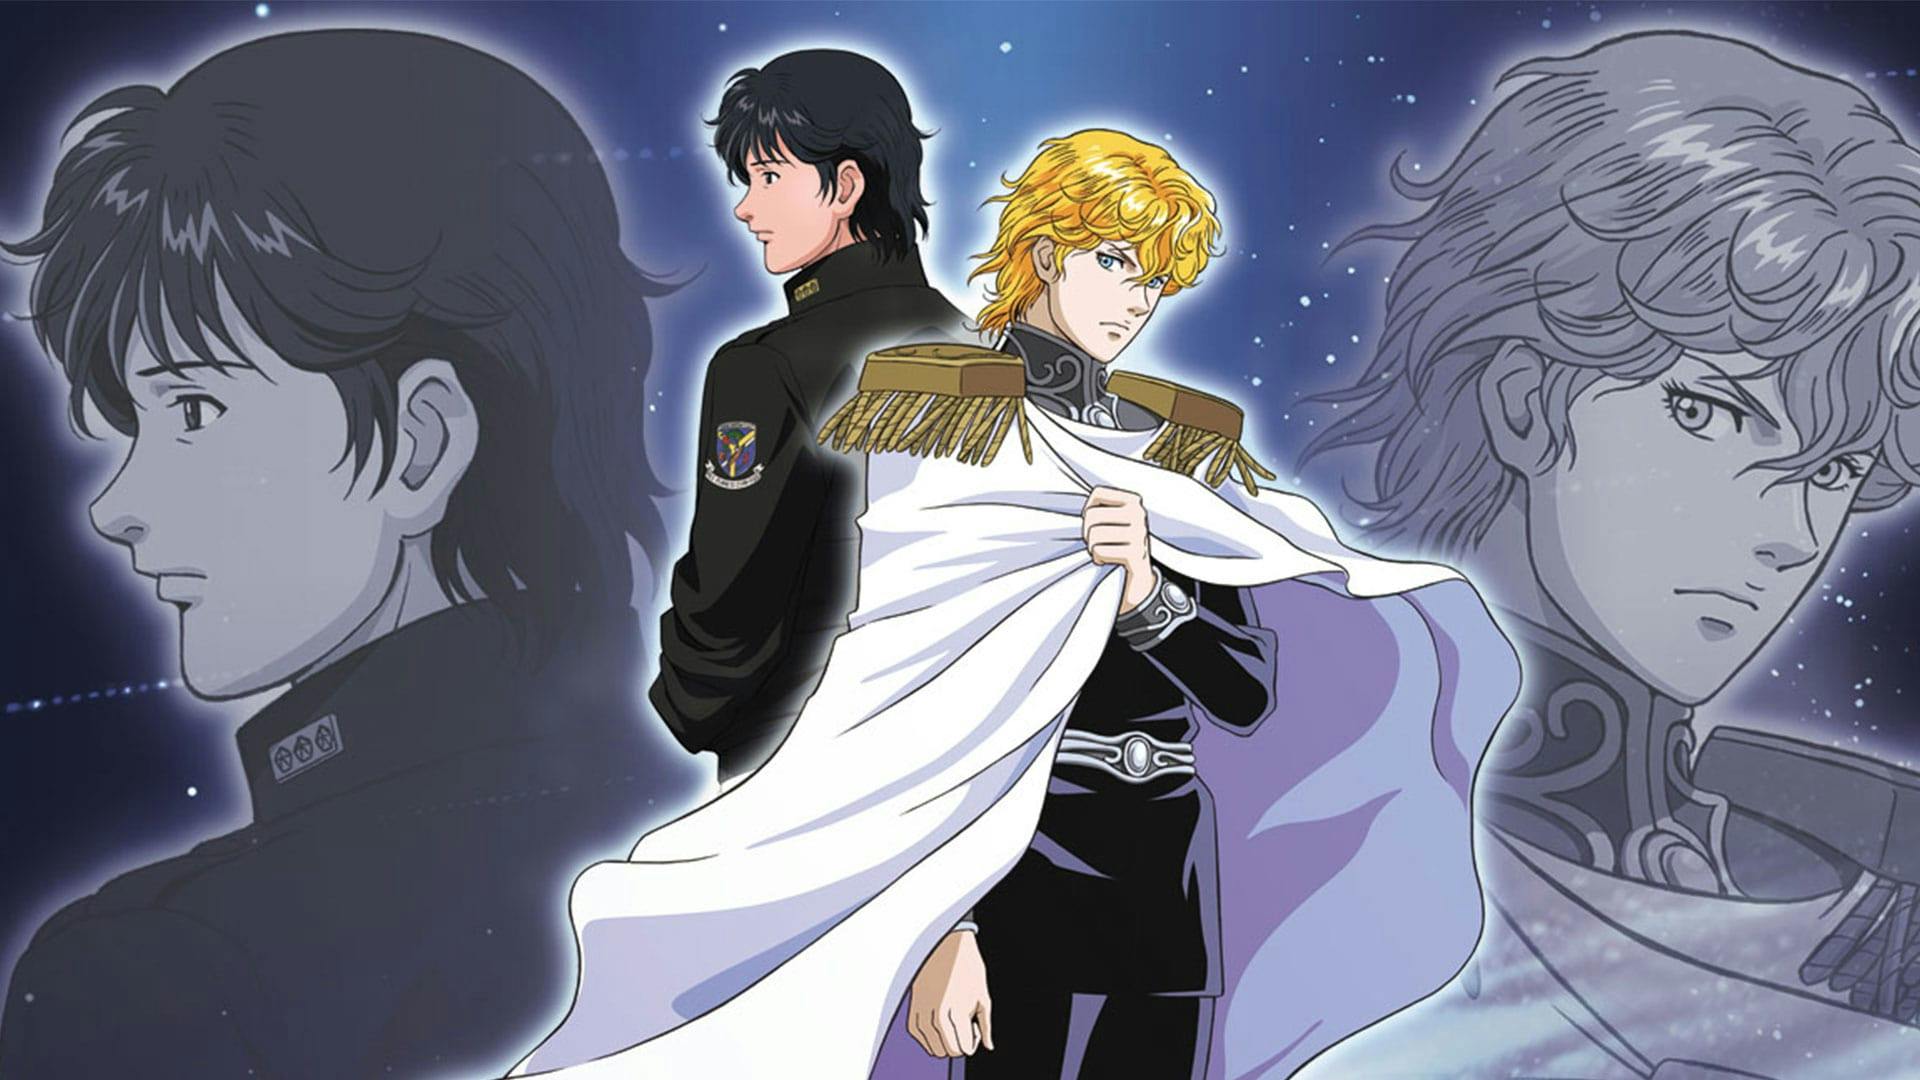 Legend of the Galactic Heroes background image